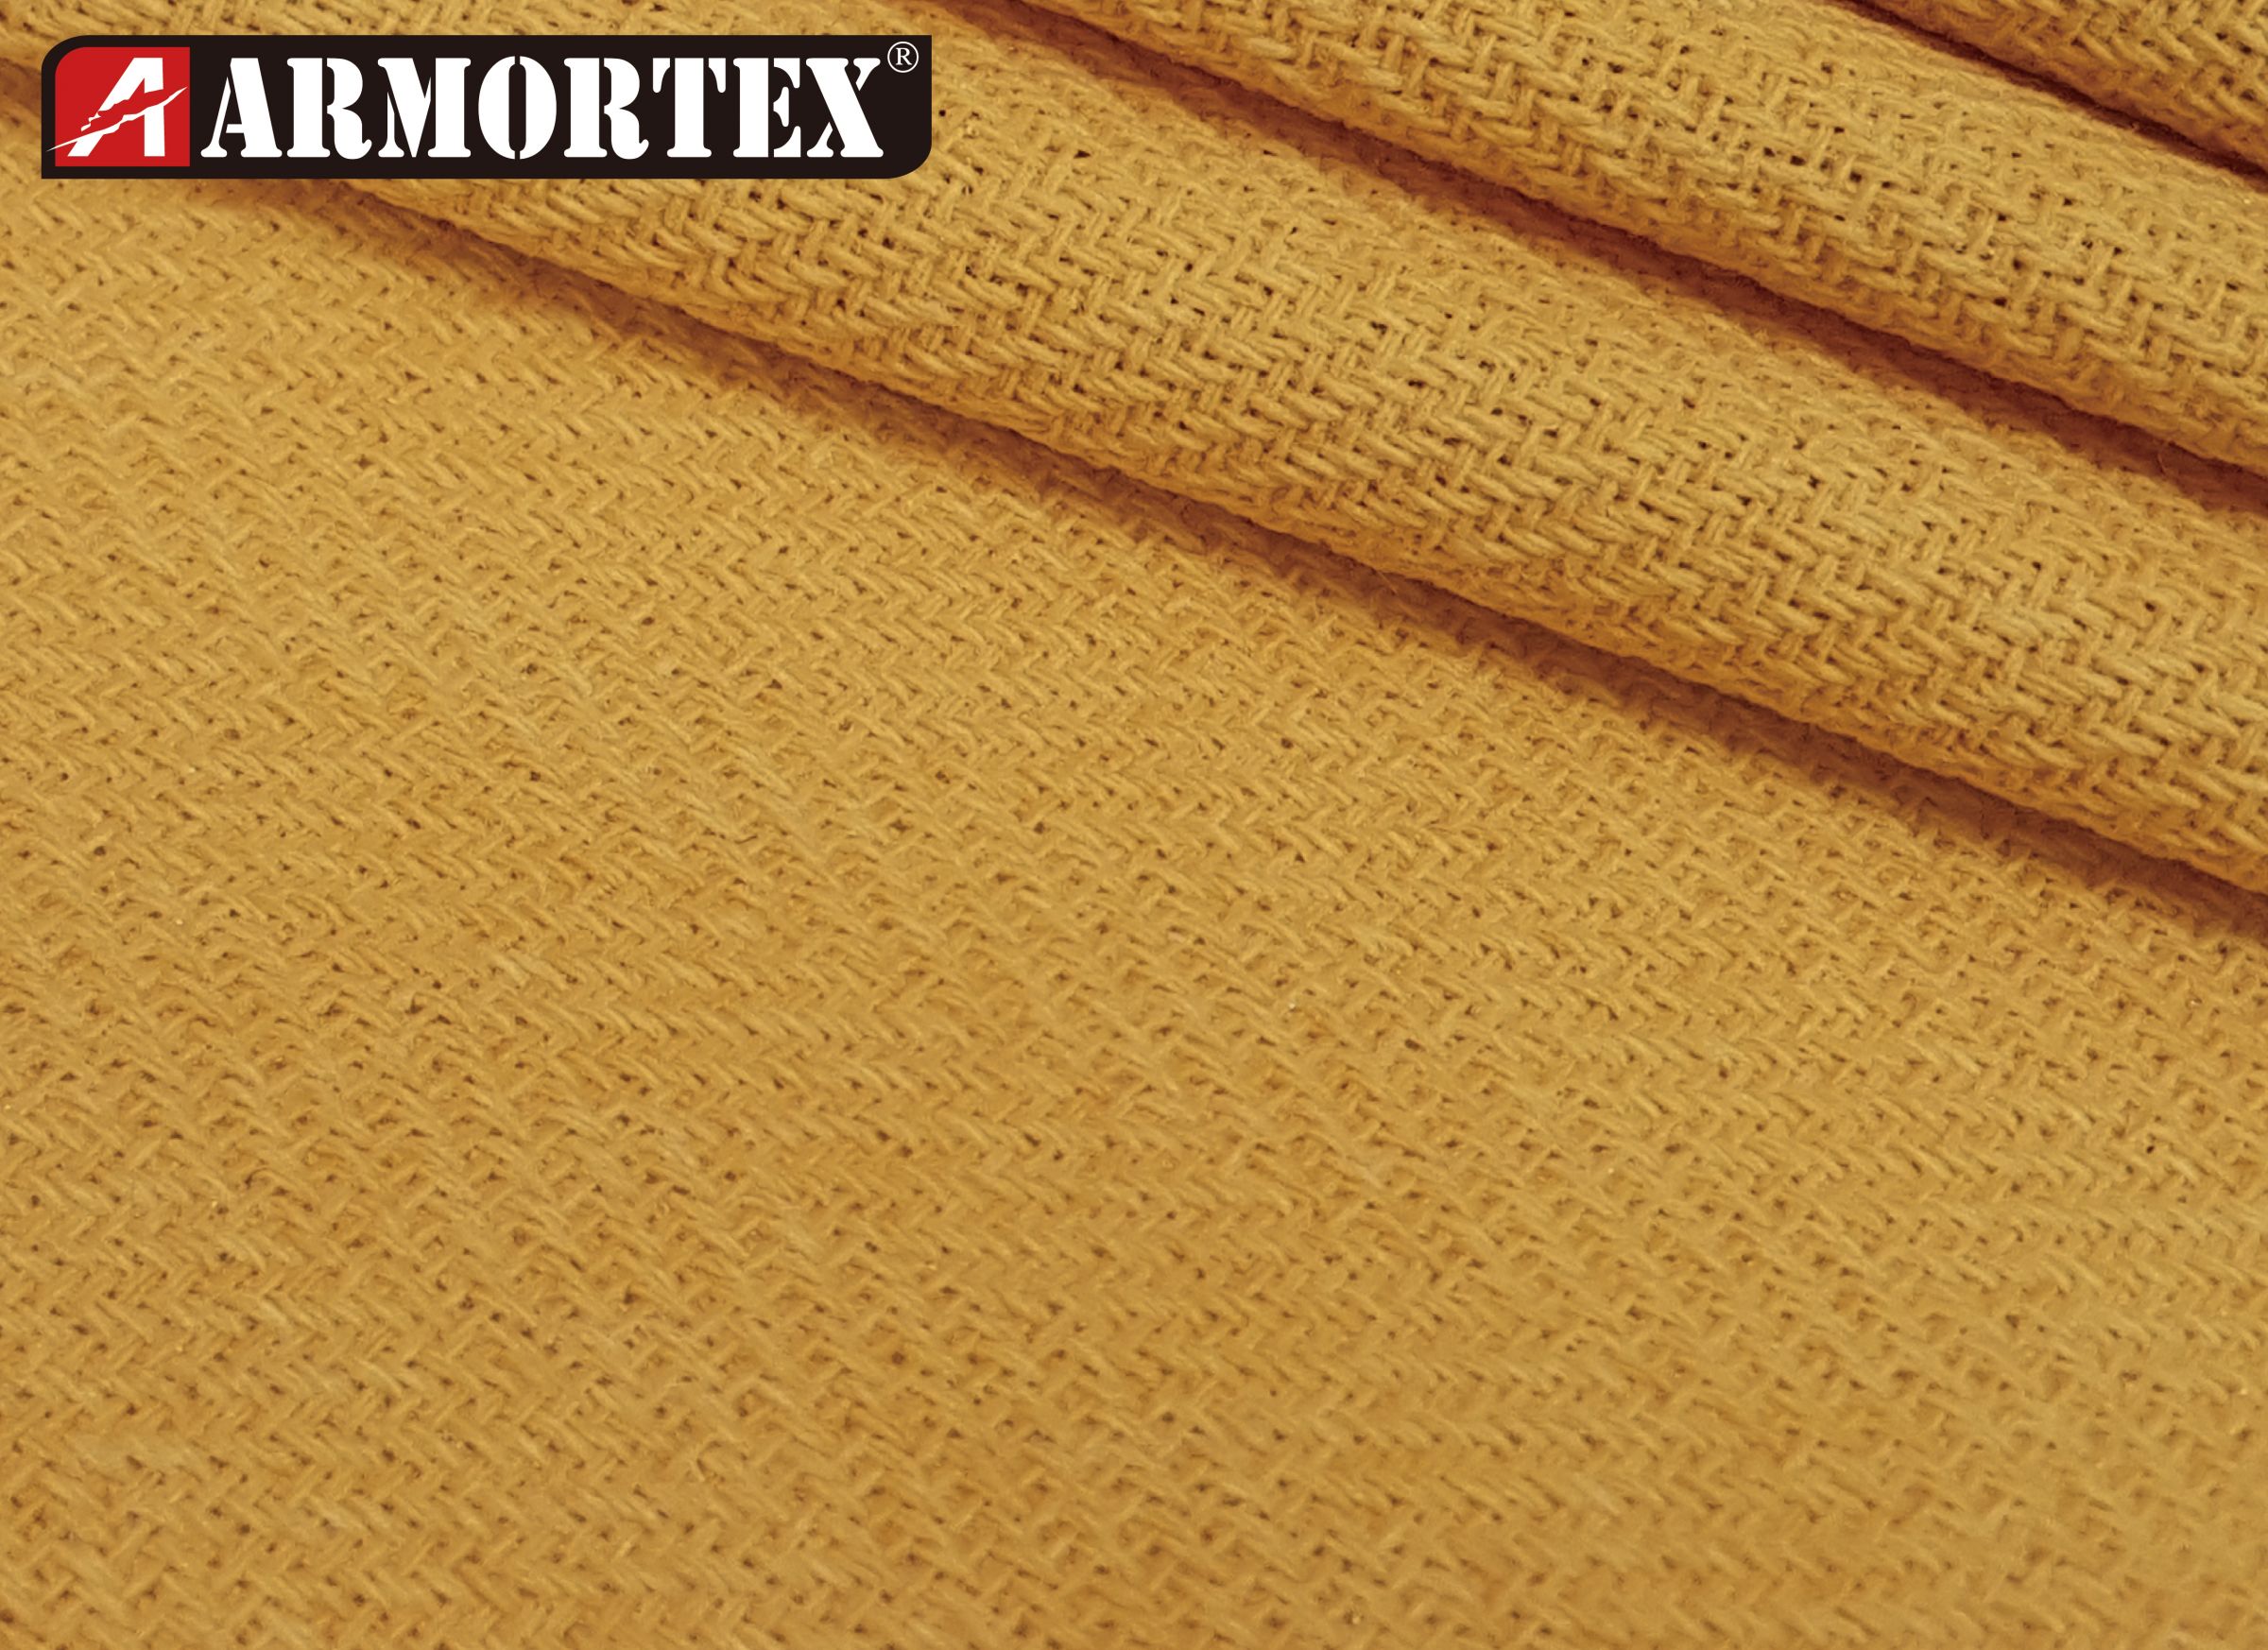 FR-PU Coated Modacrylic Polyimide Flame Retardant Fabric - Polyimide Fire-retardant  Fabric, Made in Taiwan Textile Fabric Manufacturer with ESG Reports